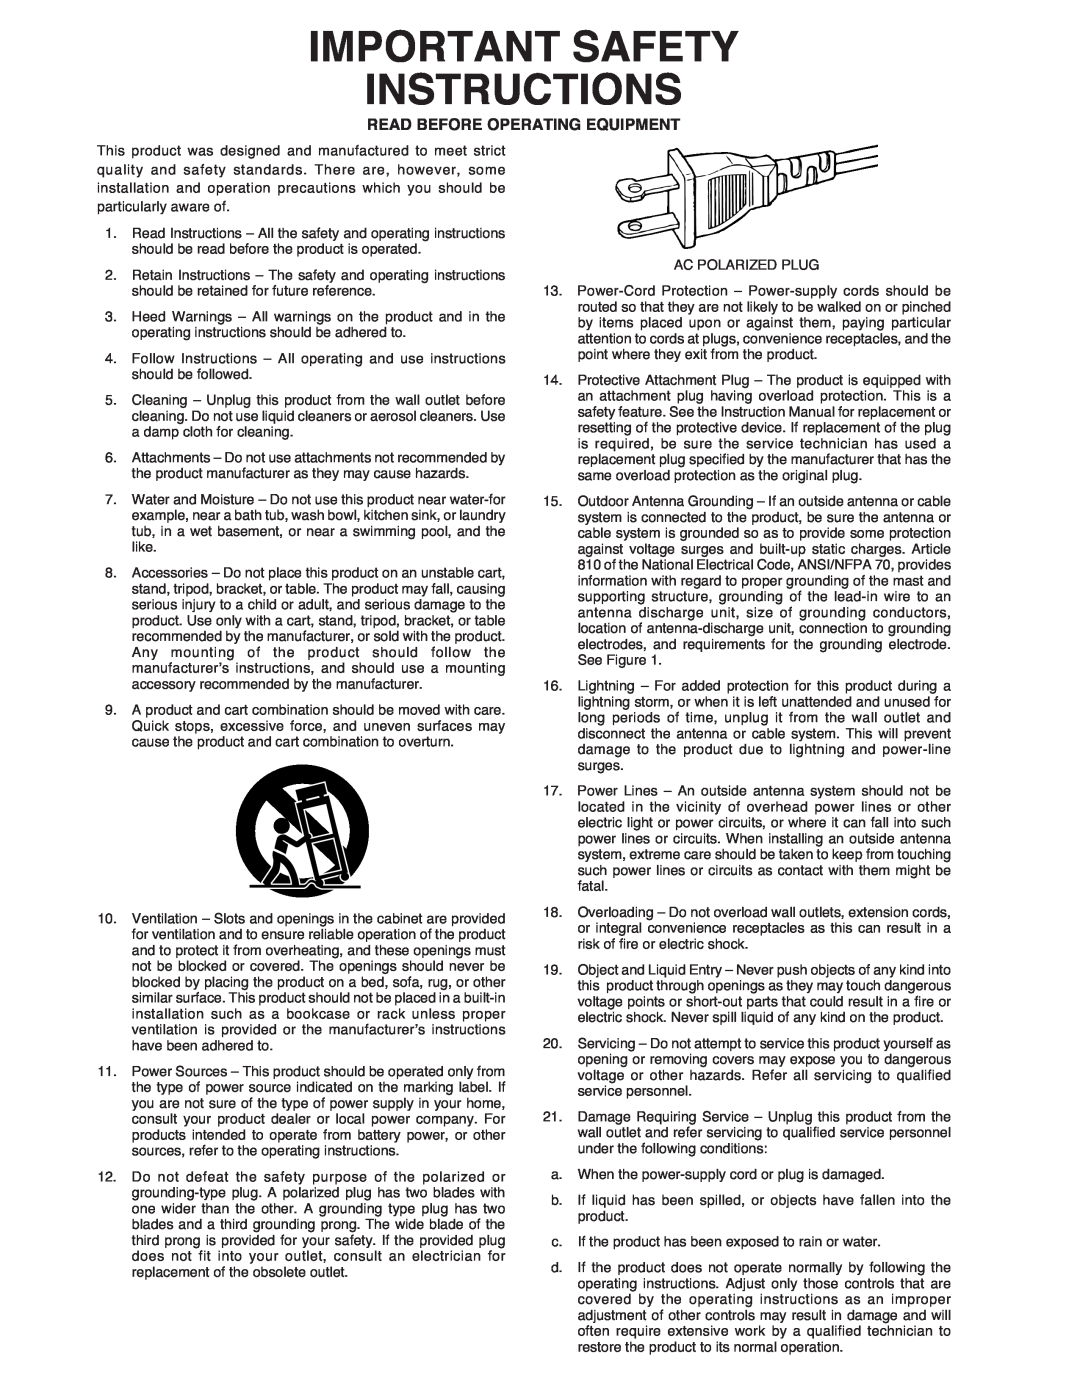 Marantz MA-9S1 manual Important Safety Instructions, Read Before Operating Equipment 